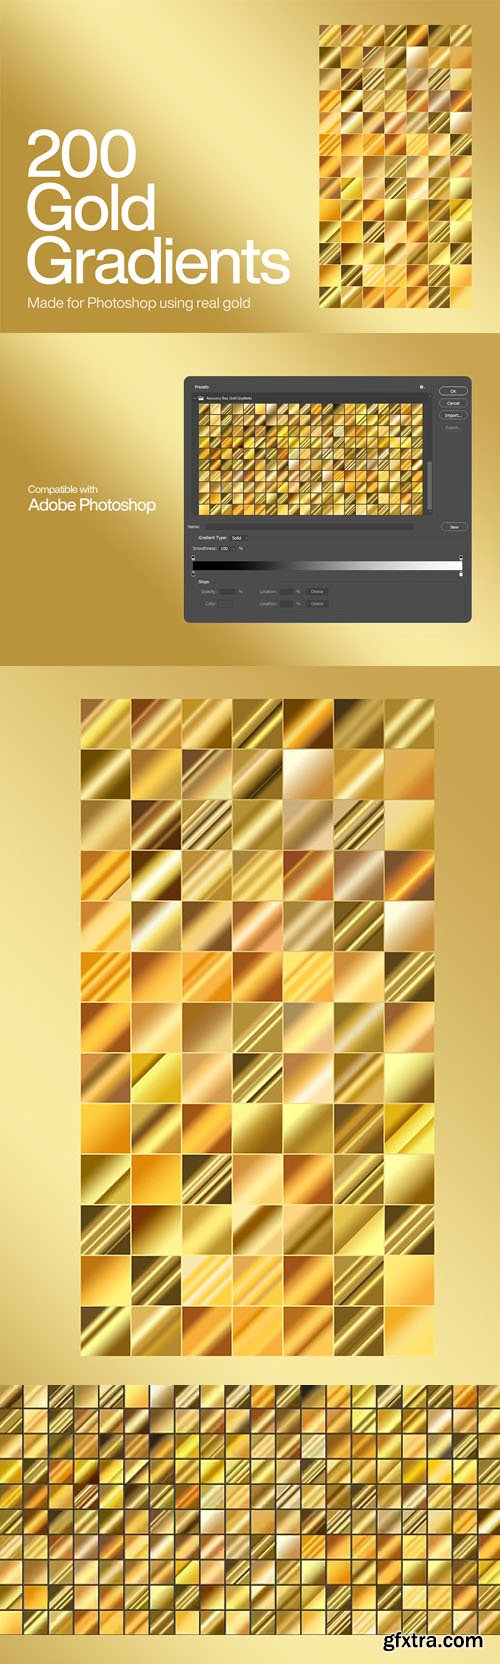 200 Gold Gradients - Made for Photoshop Using Real Gold